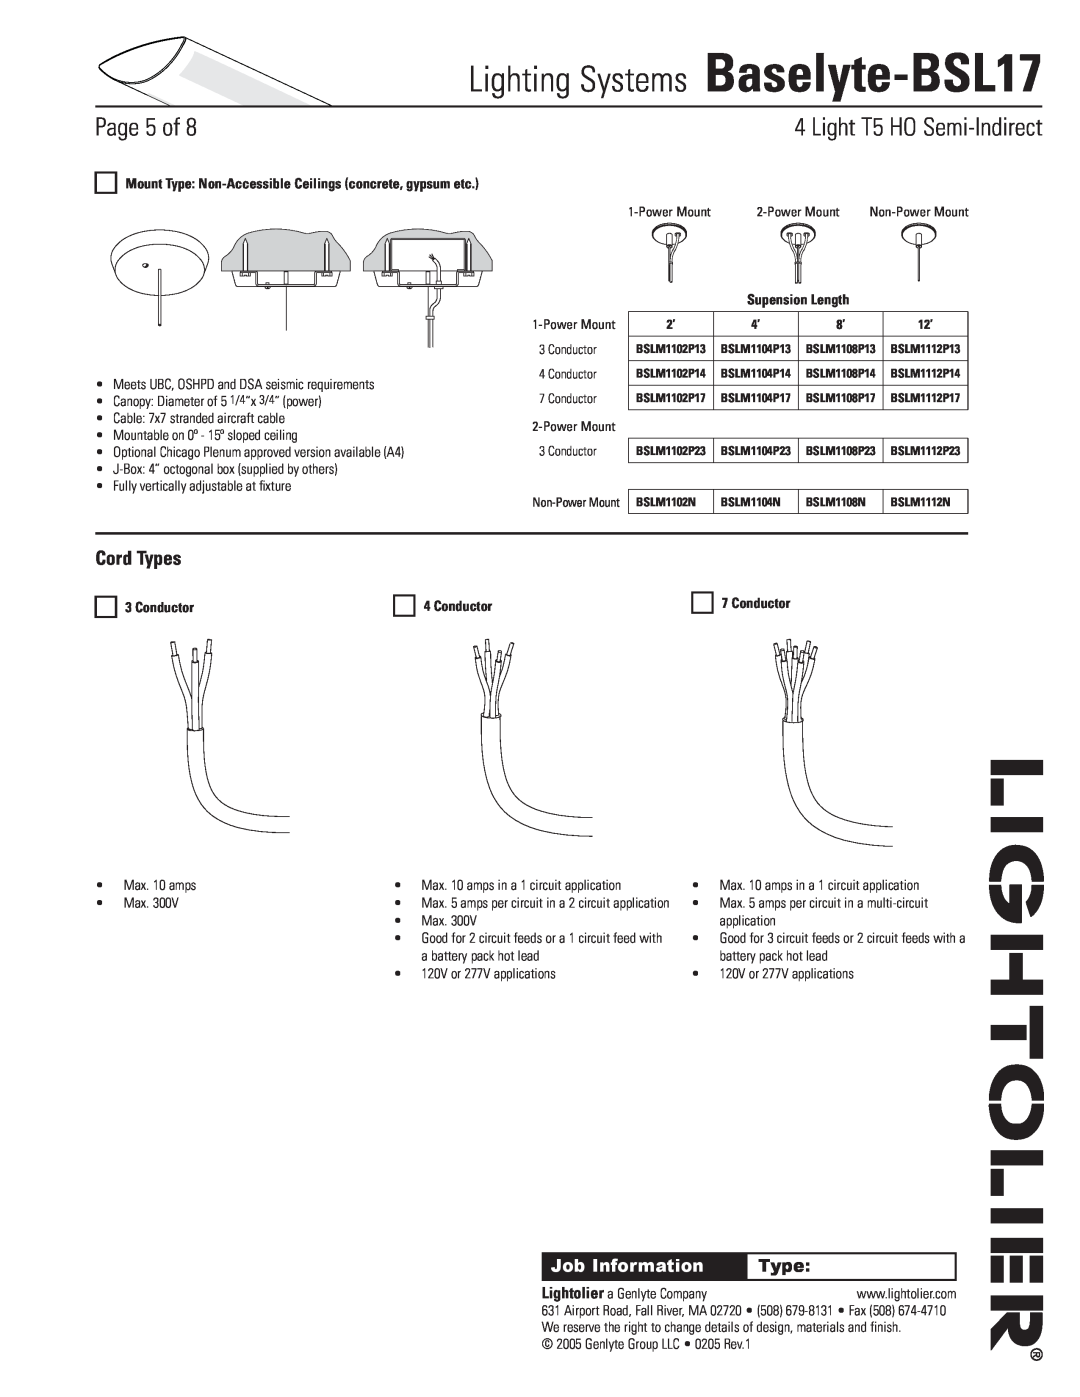 Lightolier Cord Types, Conductor, Lighting Systems Baselyte-BSL17, Page of, Light T5 HO Semi-Indirect, Job Information 